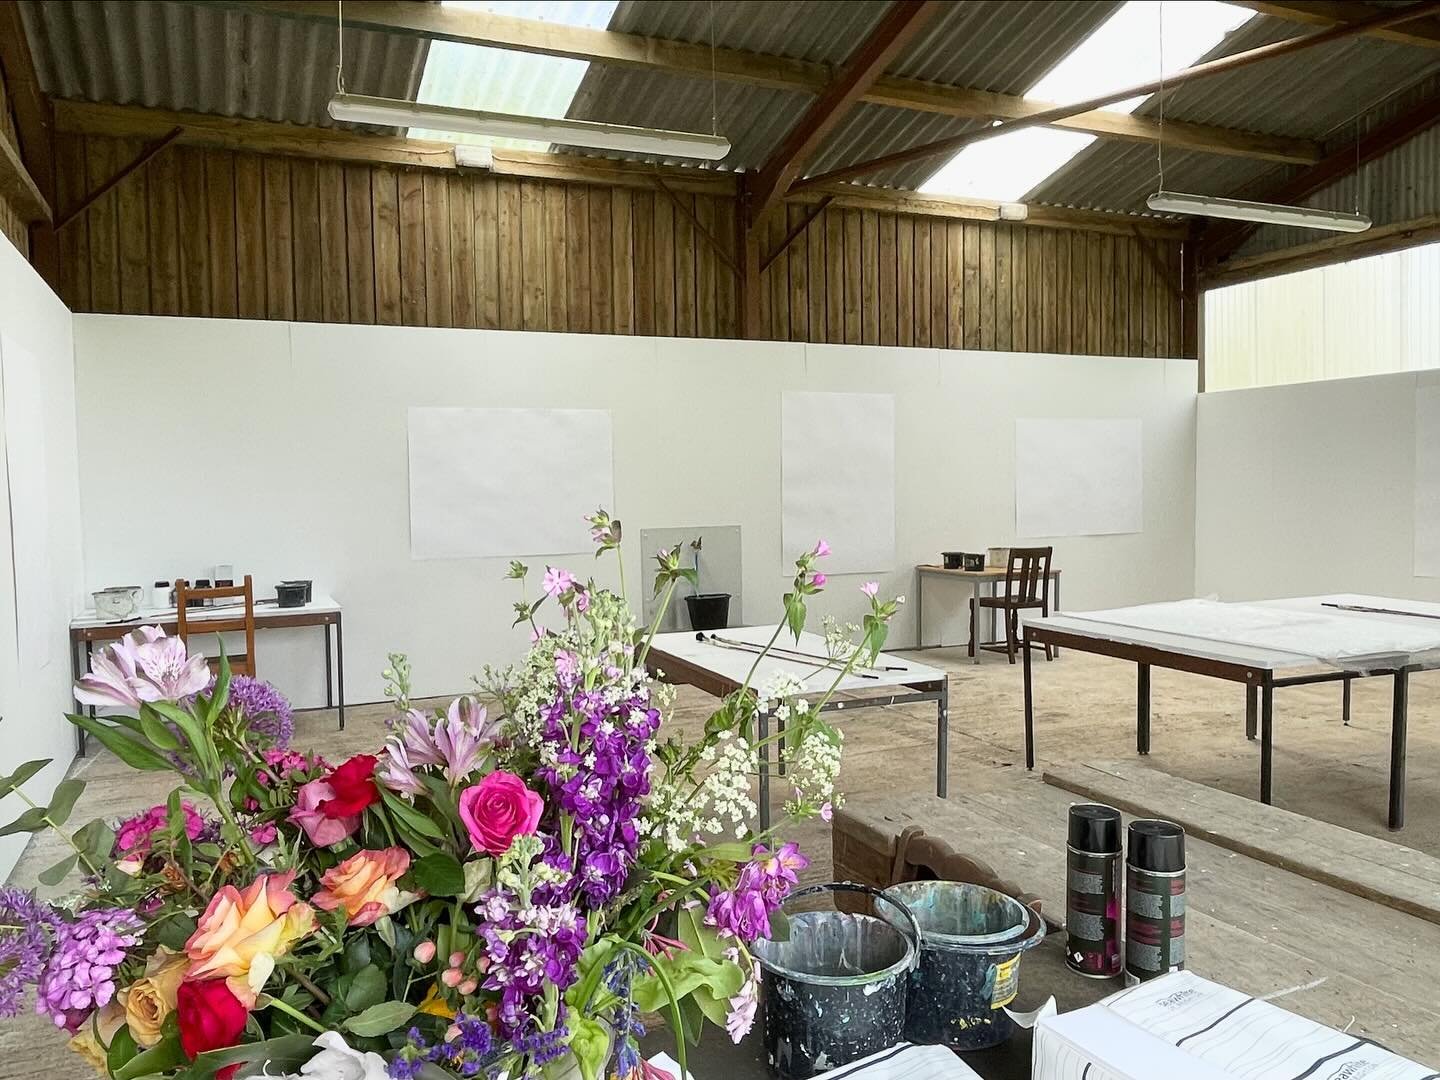 VERY excited about our latest addition to The Lund - The Drawing Barn!

This weekend Emily Ball will be cutting the ribbon, running our first course in this new studio space dedicated to drawing and mark making on a BIG scale! 

Opening directly out 